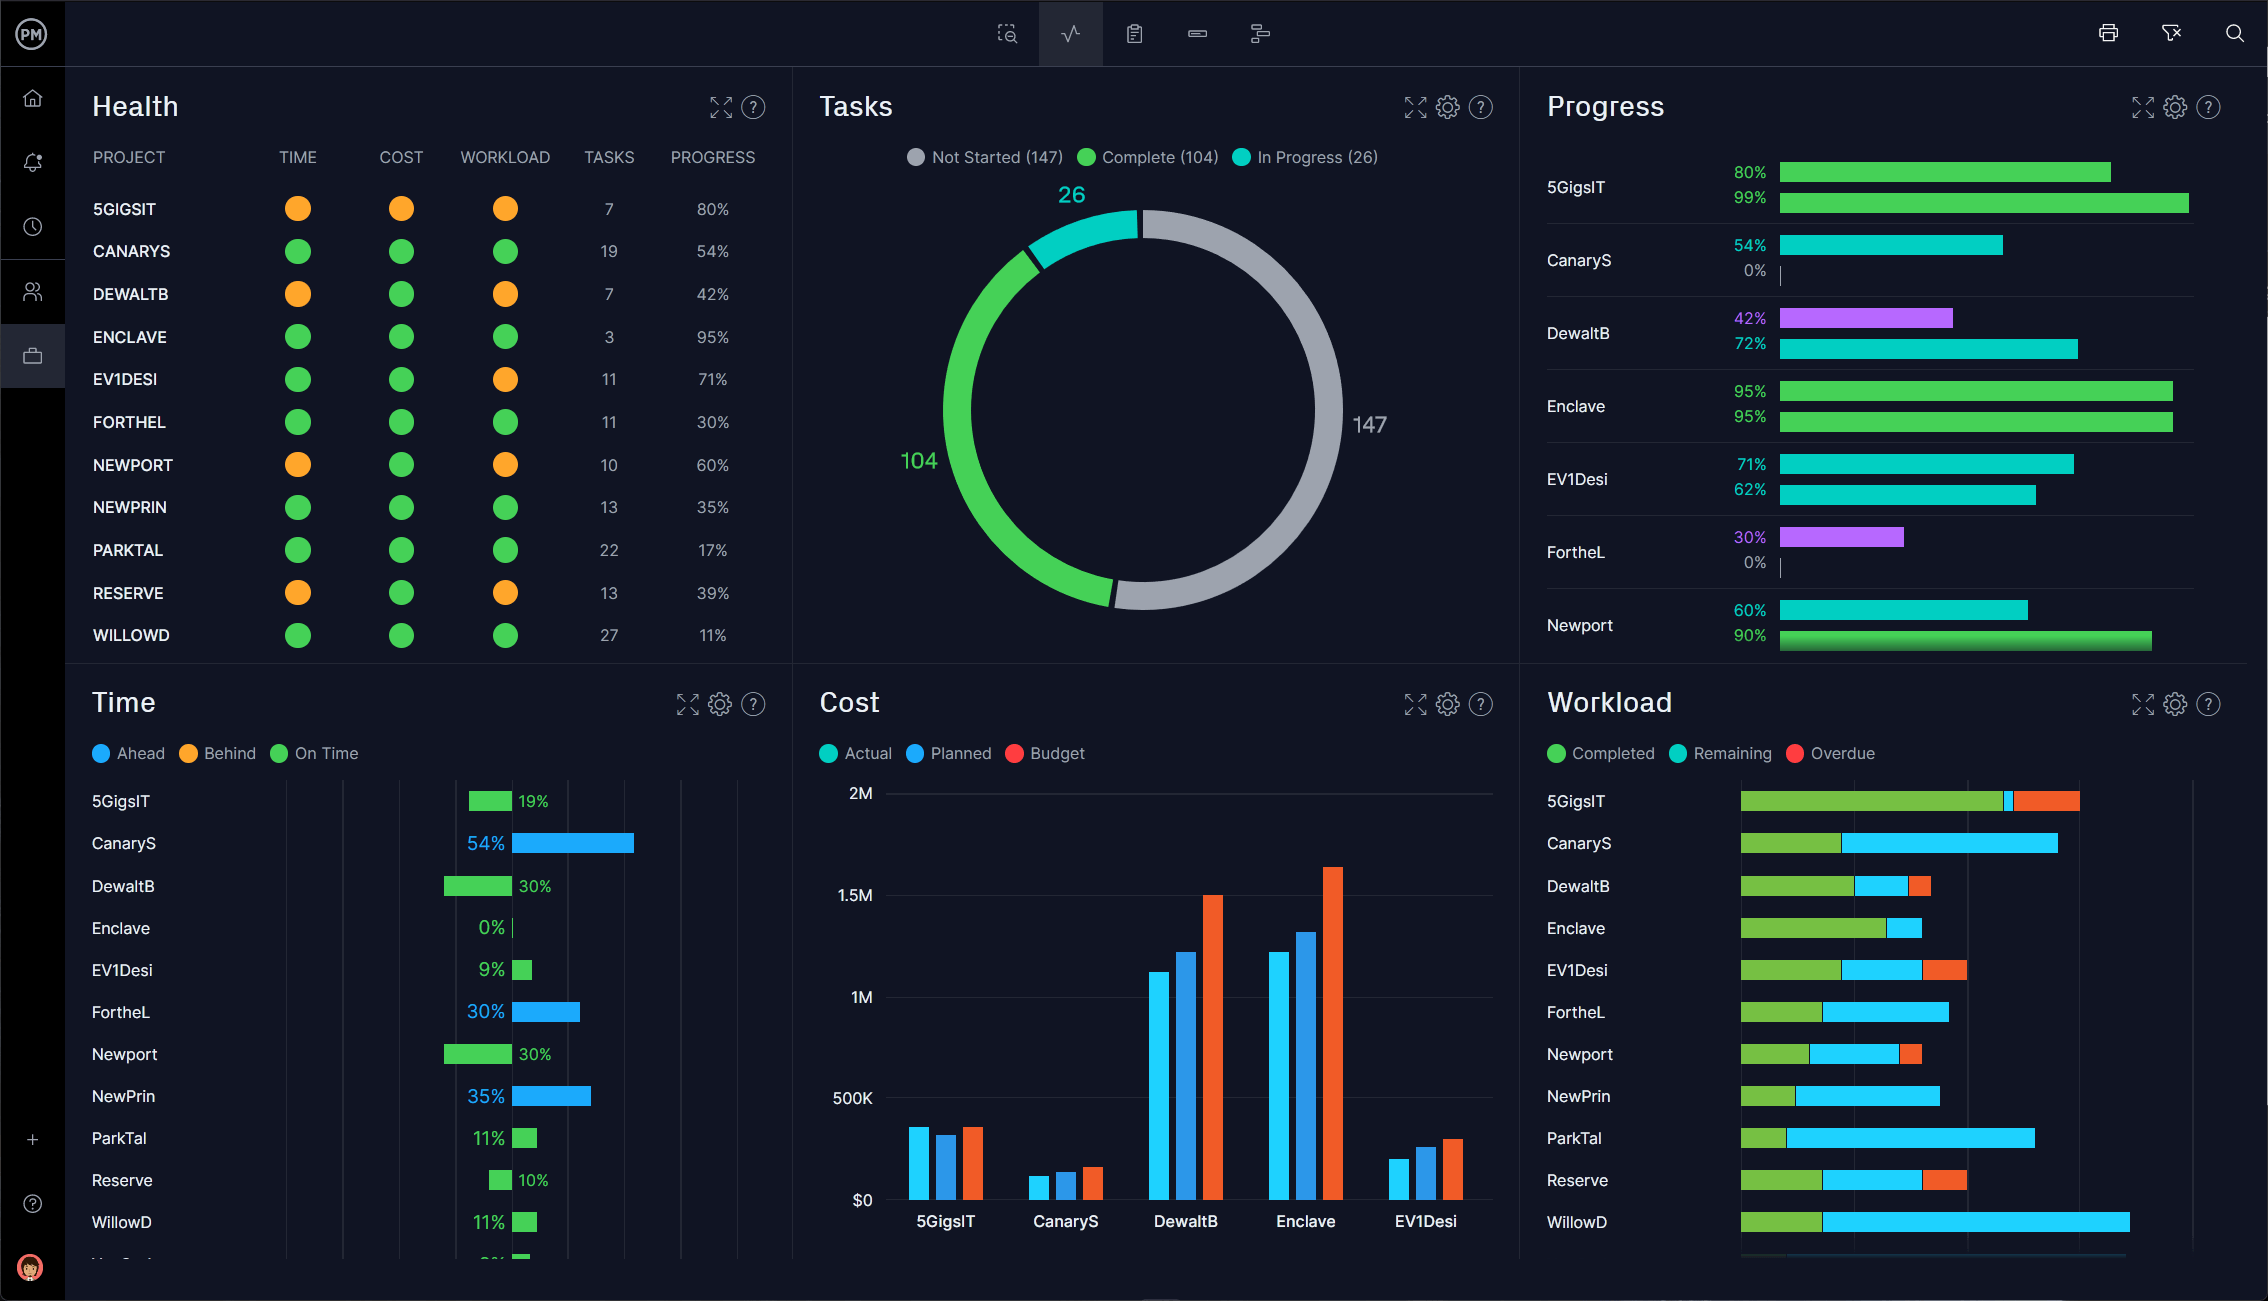 ProjectManager's project dashboard